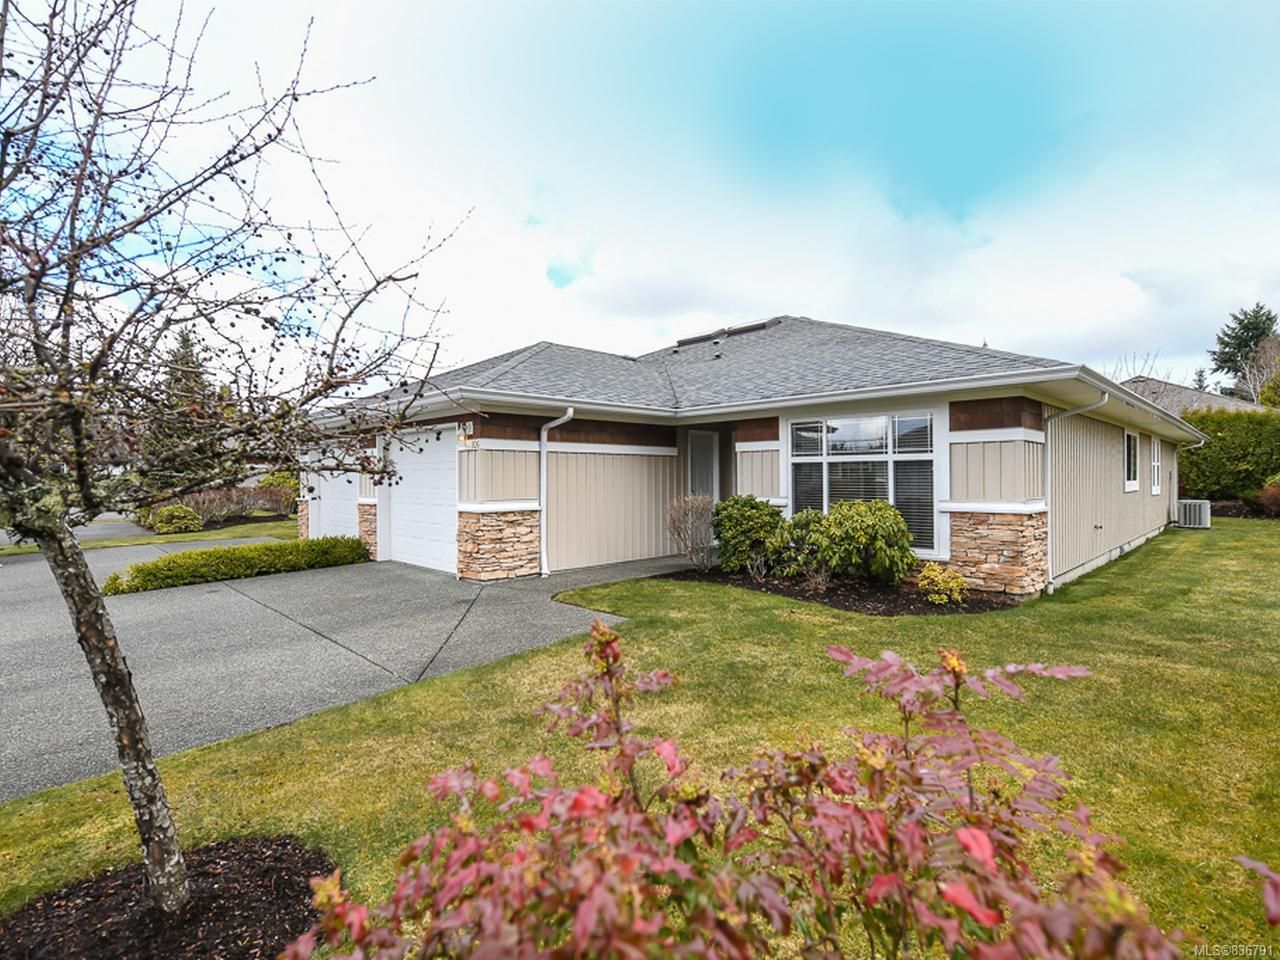 Main Photo: 106 2077 St Andrews Way in COURTENAY: CV Courtenay East Row/Townhouse for sale (Comox Valley)  : MLS®# 836791